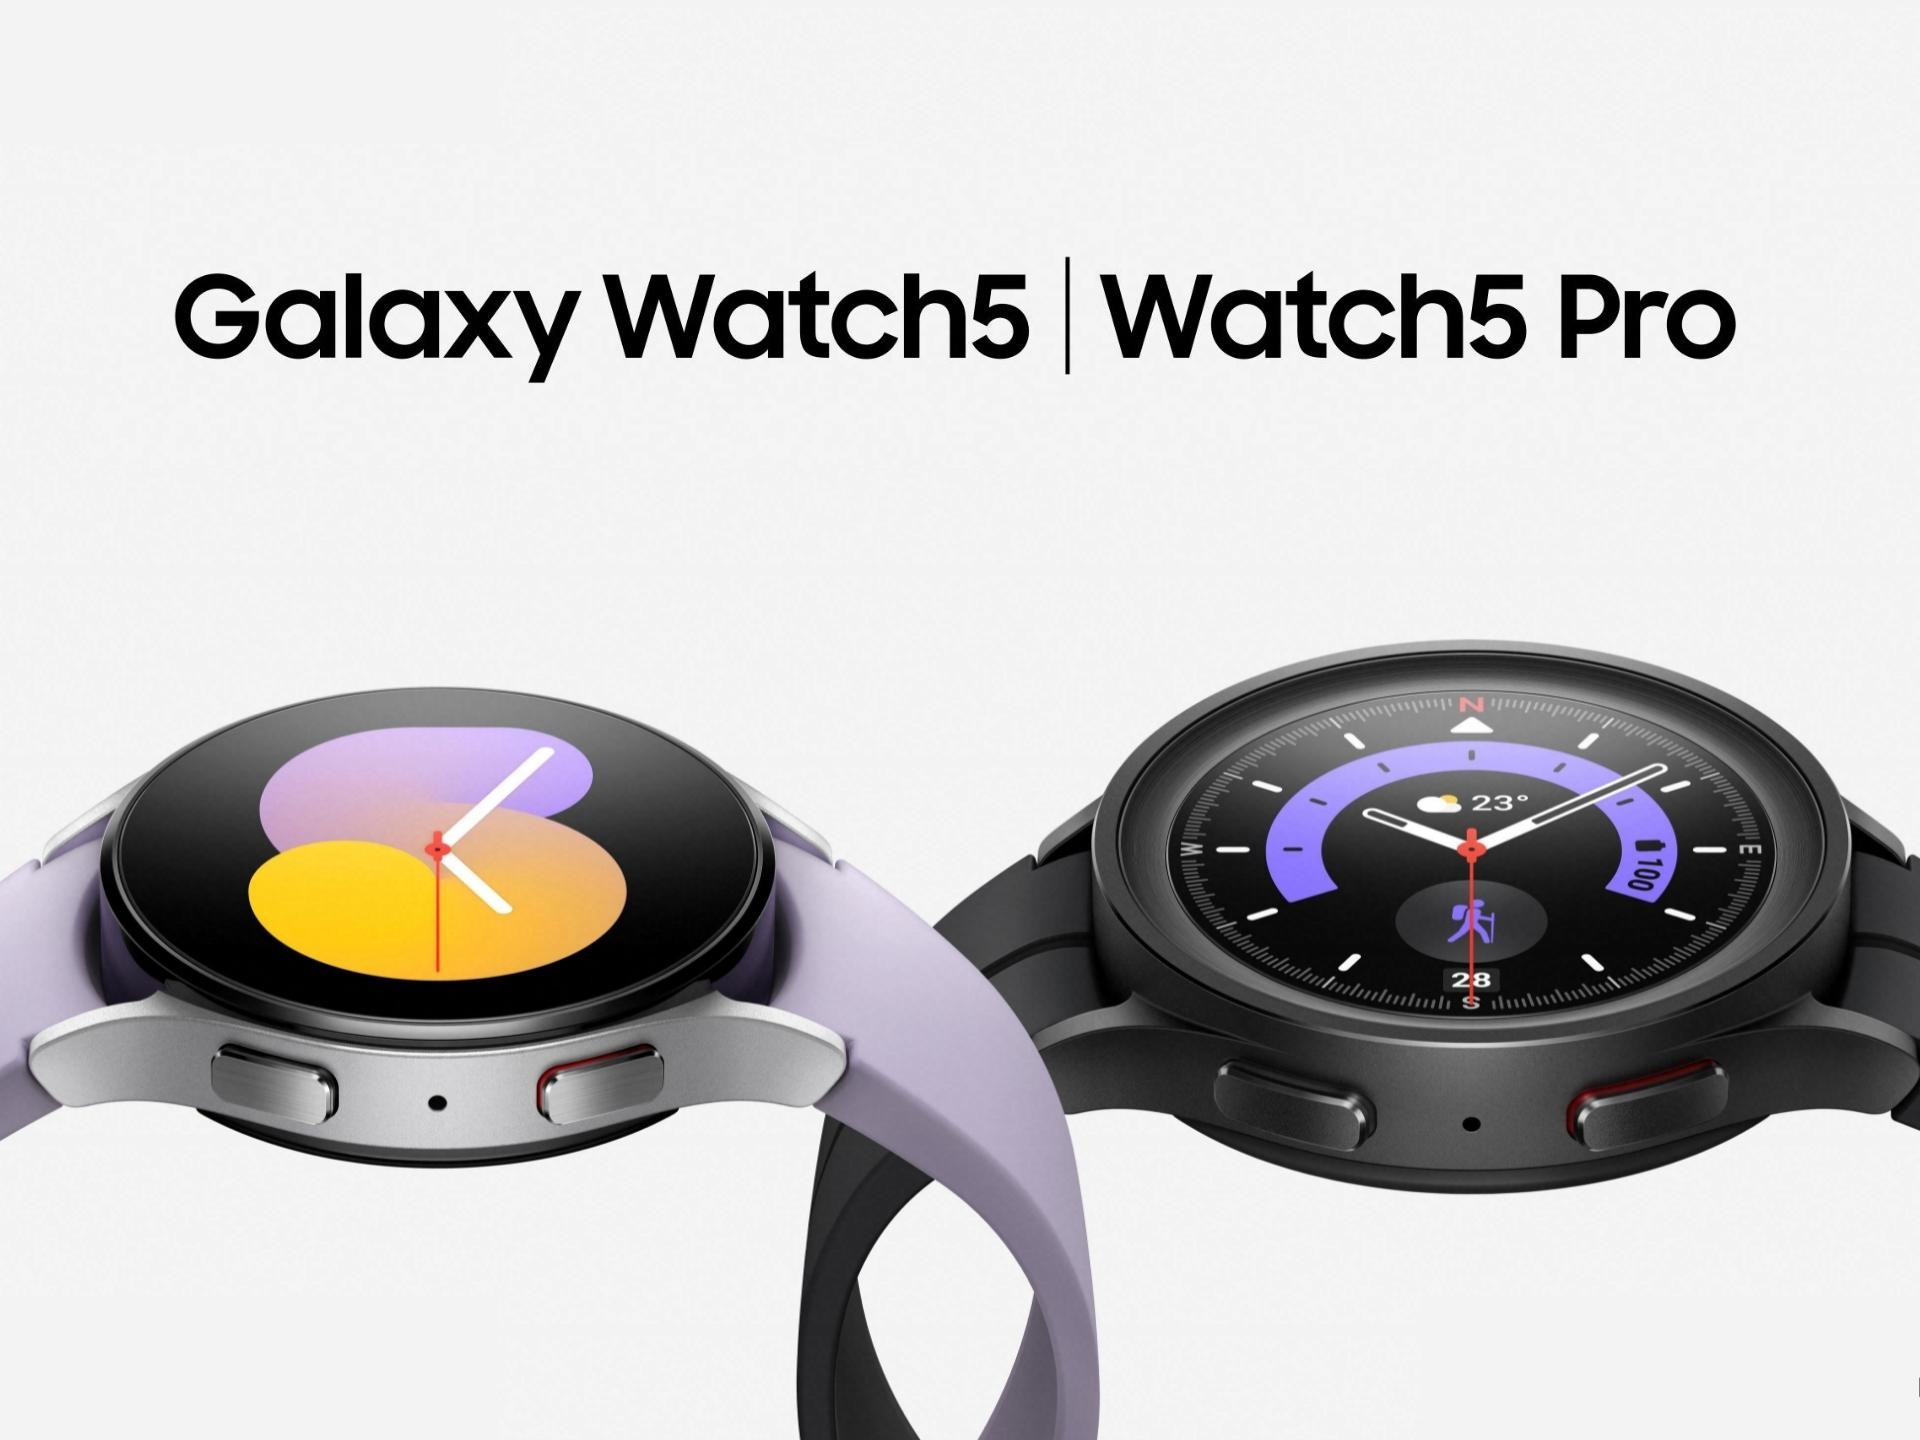 Galaxy Watch 5 and Watch 5 Pro are official: Here’s everything you need to know